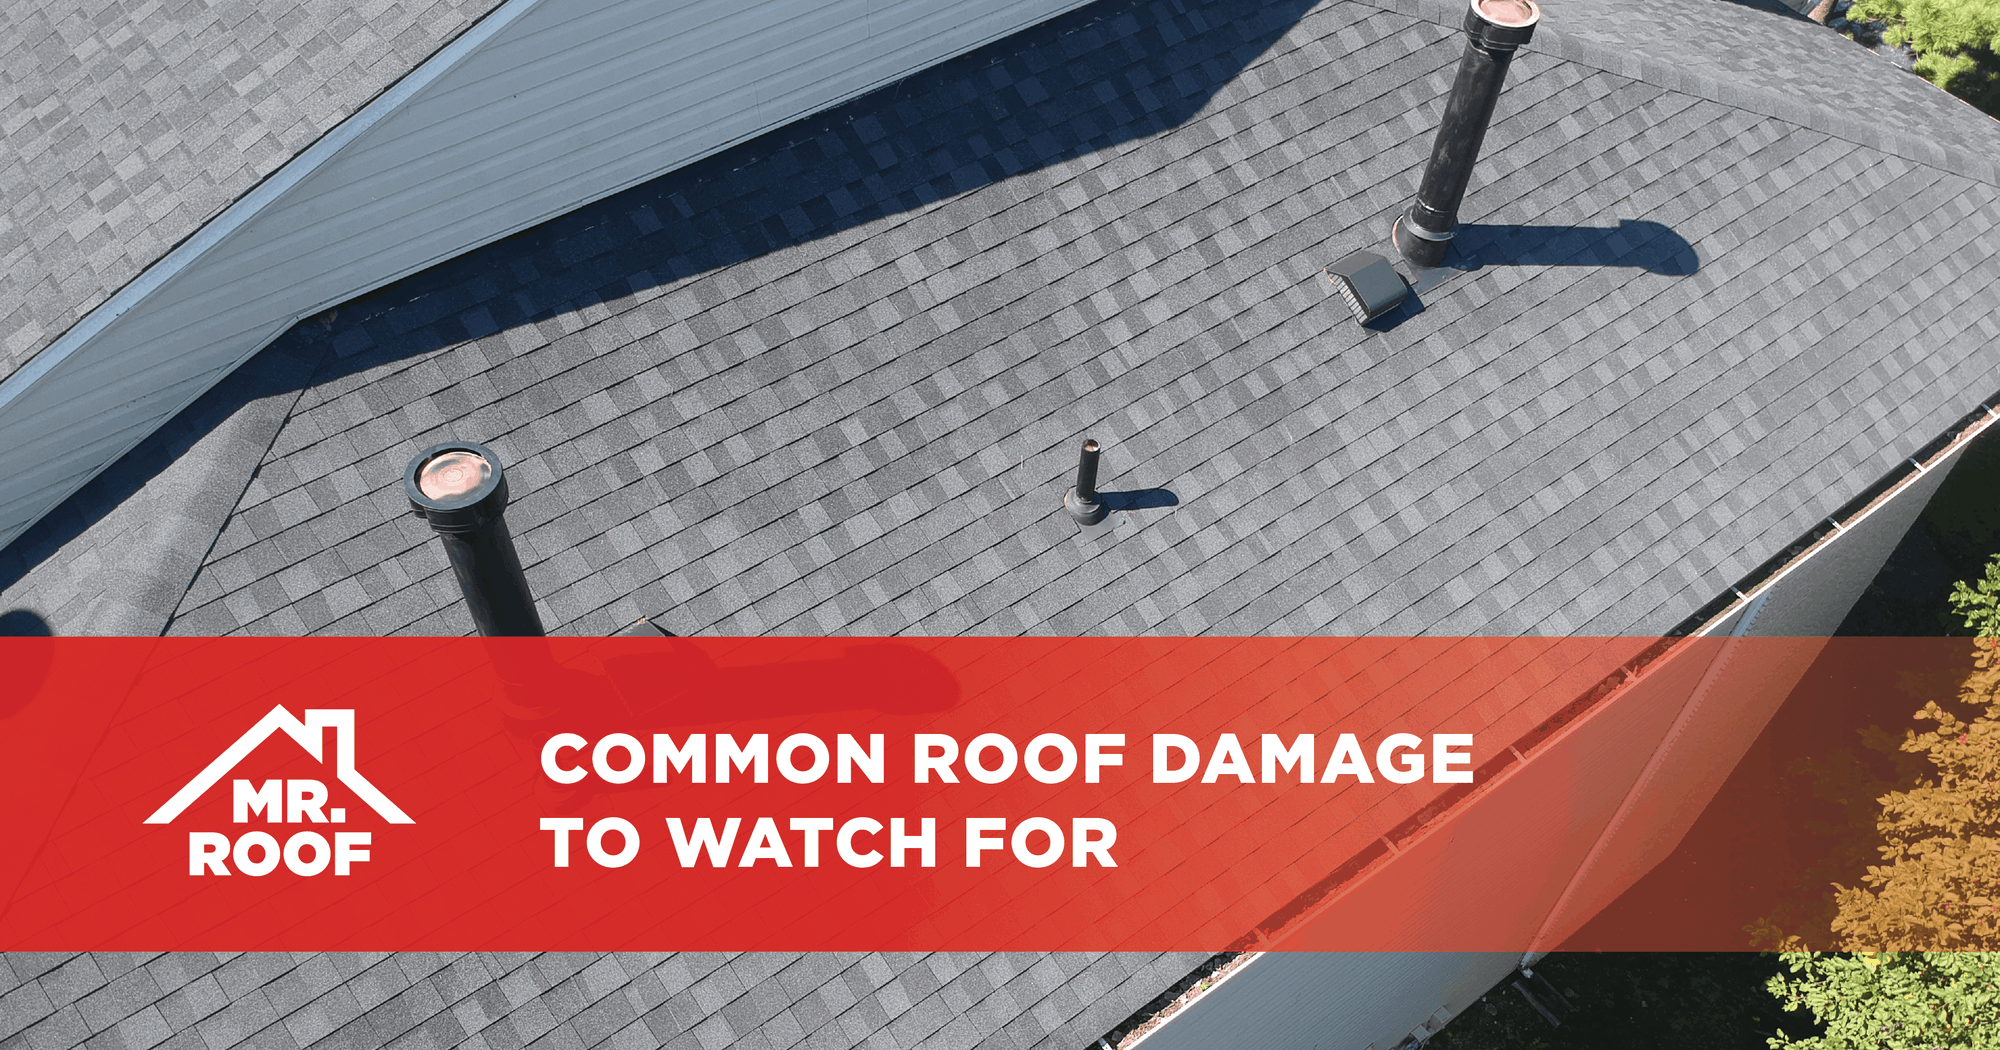 Common roof damage to watch for